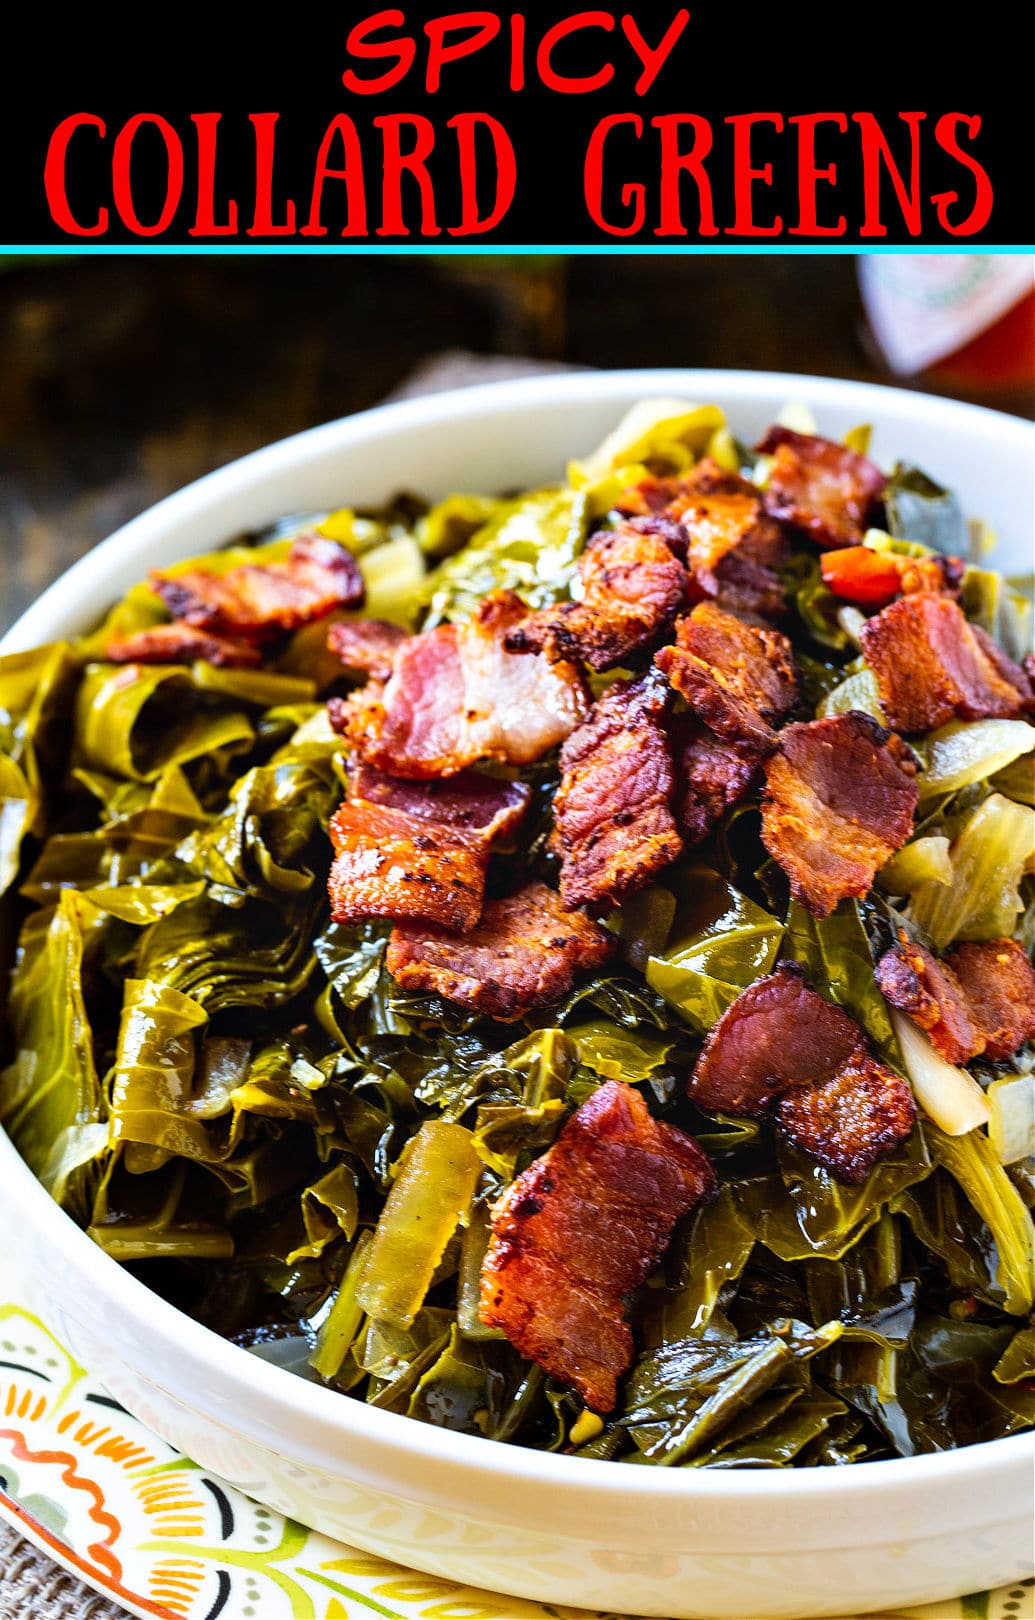 Spicy Collard Greens in a serving bowl.